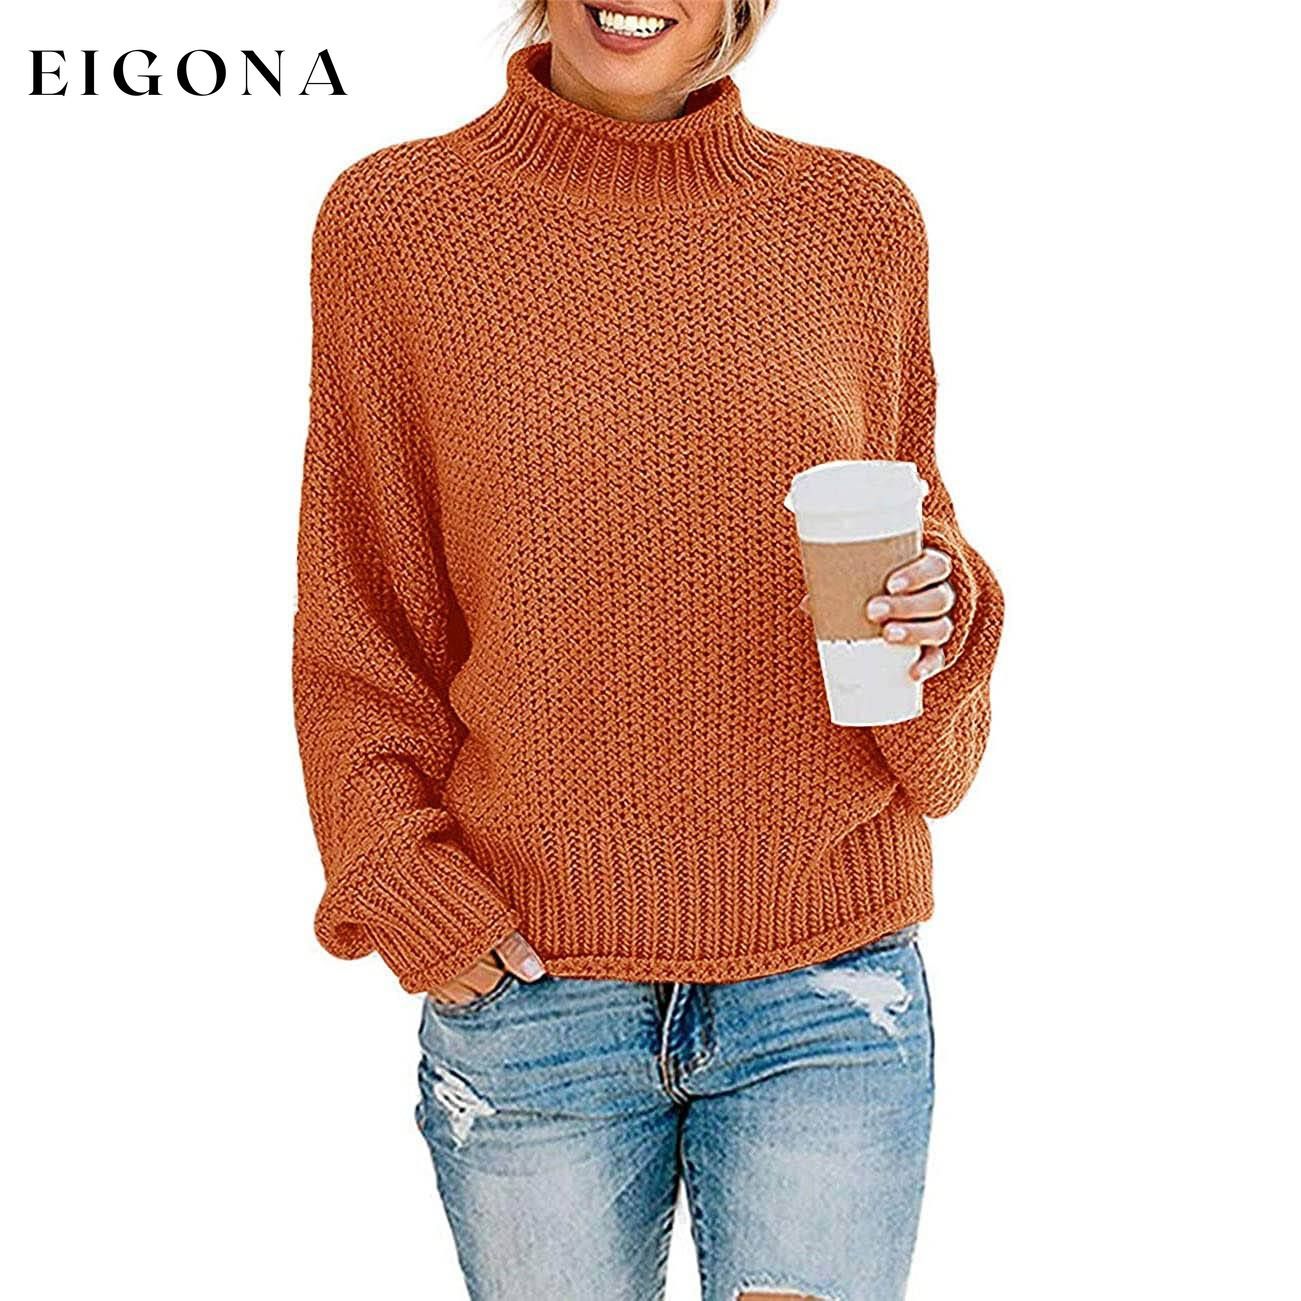 Women's Turtleneck Batwing Sleeve Loose Oversized Chunky Knitted Pullover Sweater Jumper Tops Orange __stock:500 clothes refund_fee:1200 tops